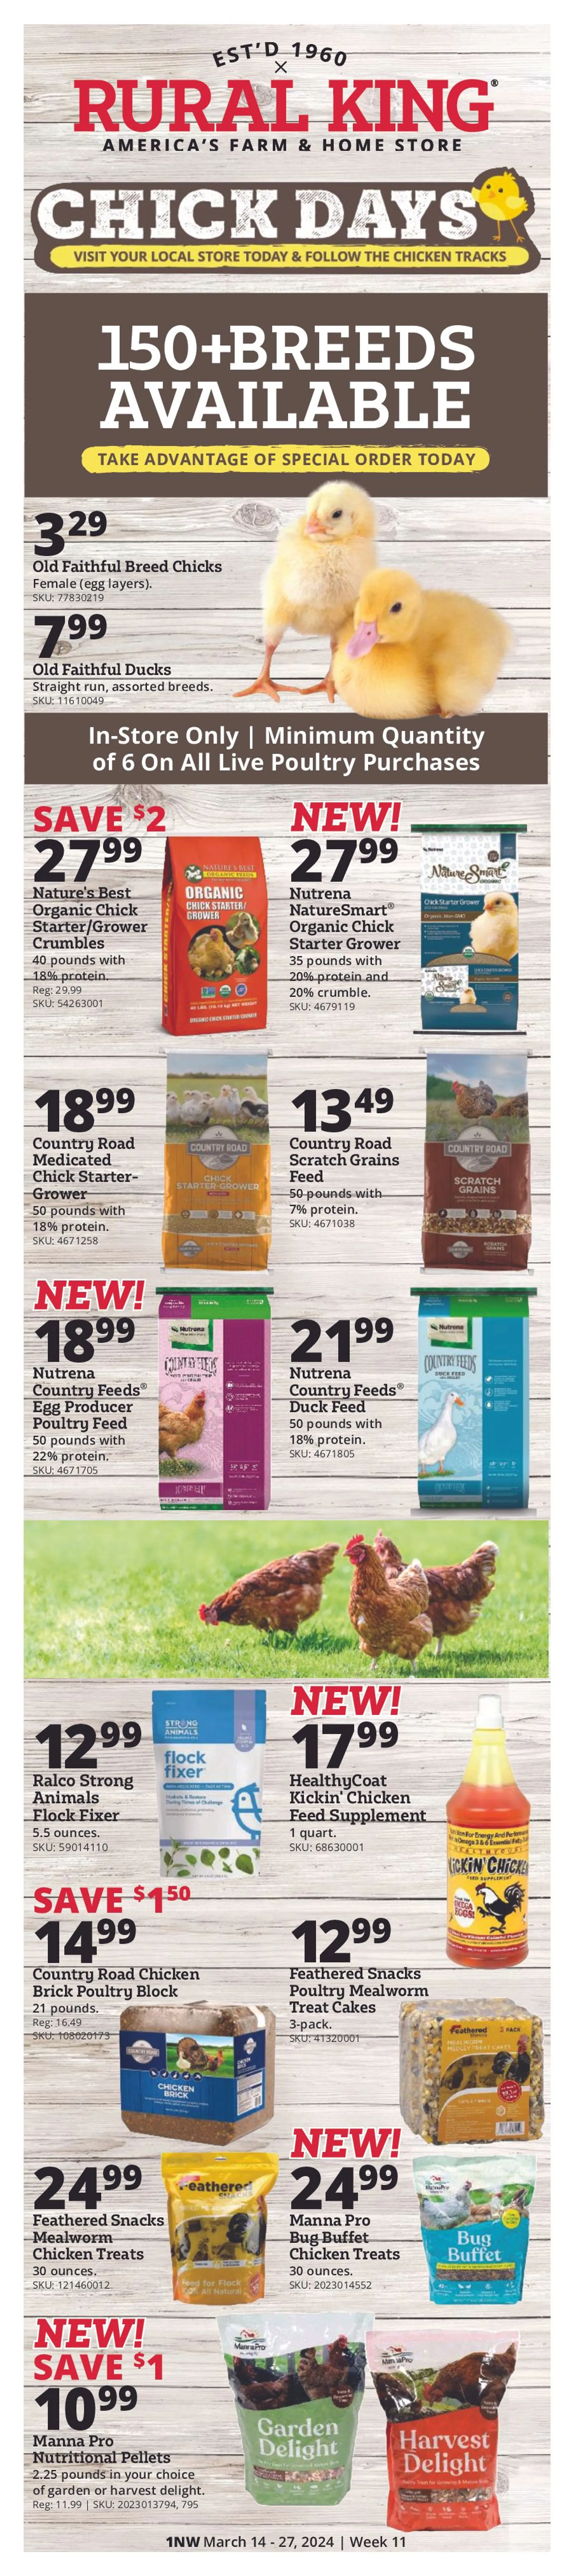 Weekly ad RURAL KING SPECIAL DEAL from March 14 to March 27 2024 - Page 